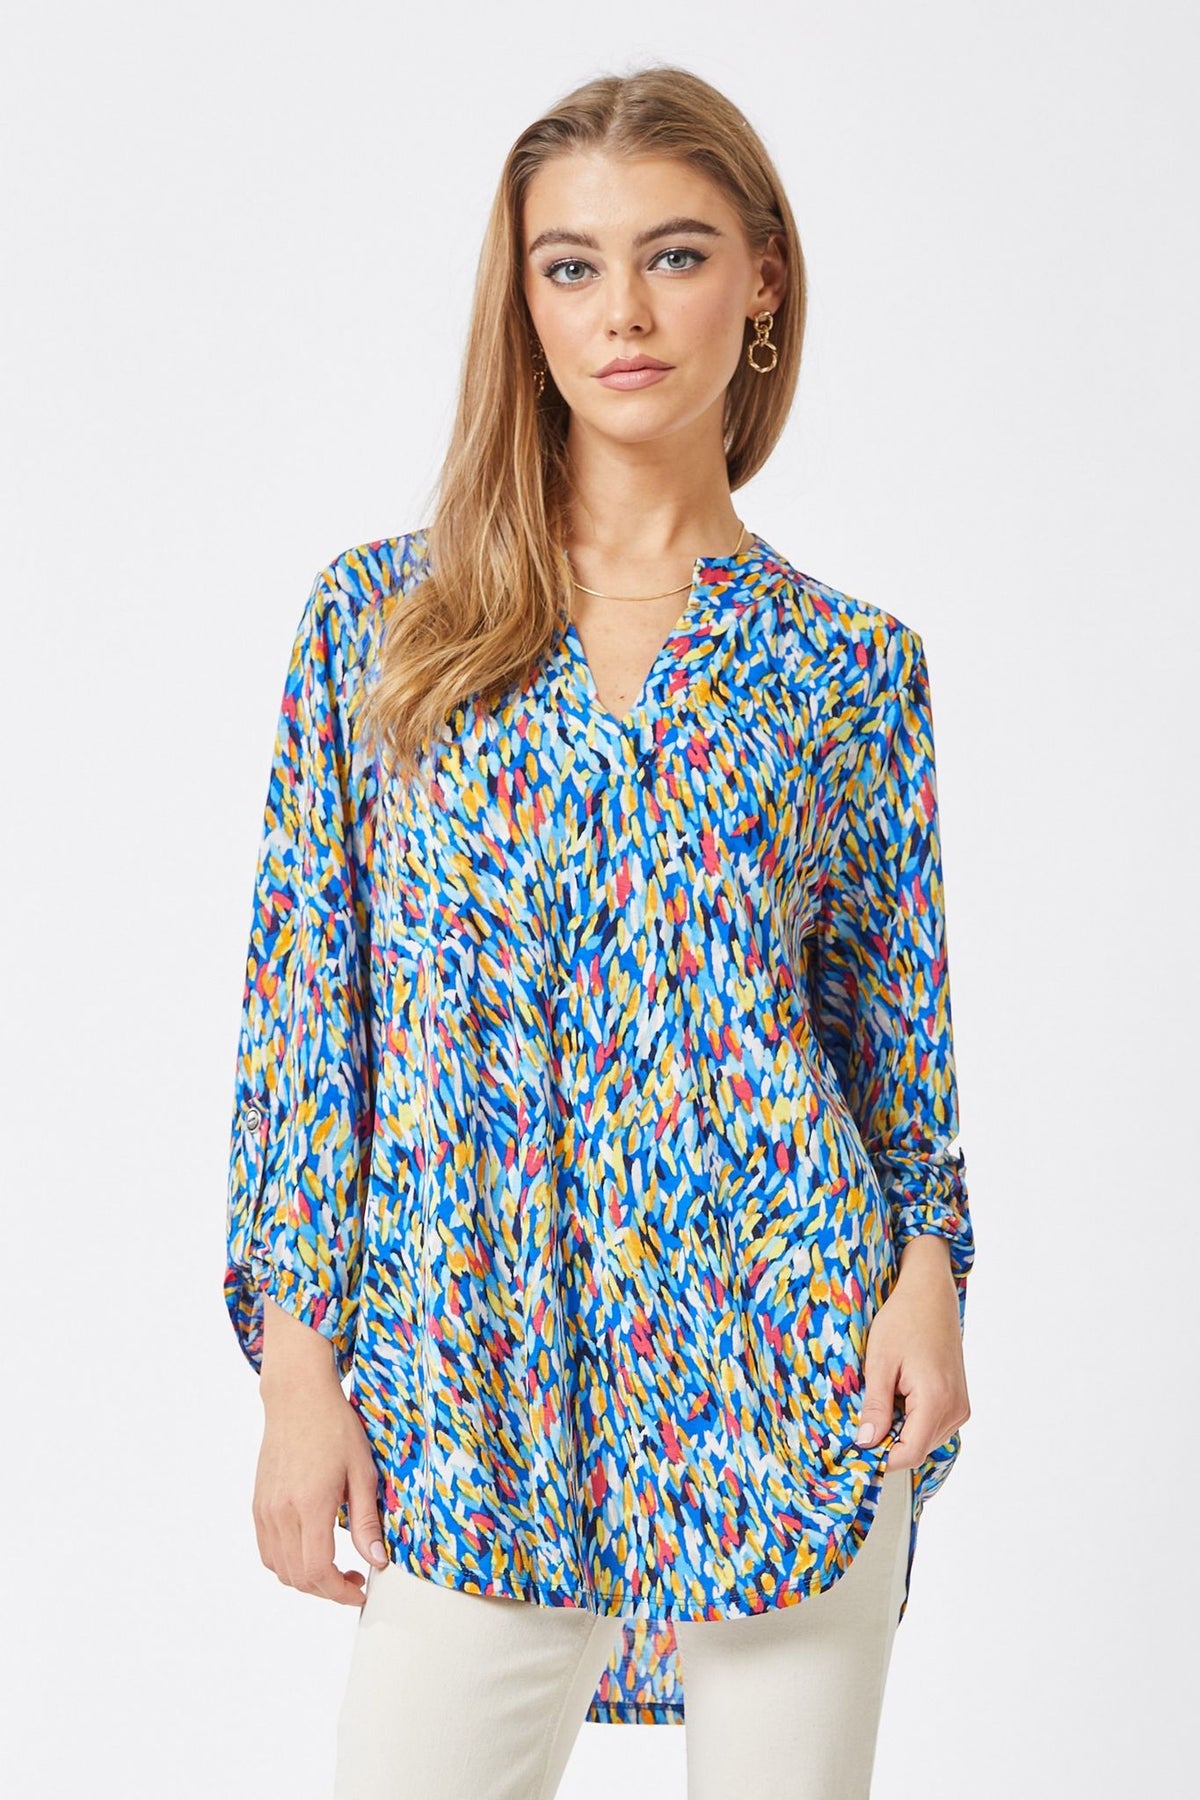 Never Leaving You Royal Blue/Multi Color Printed Top - T9789RBL